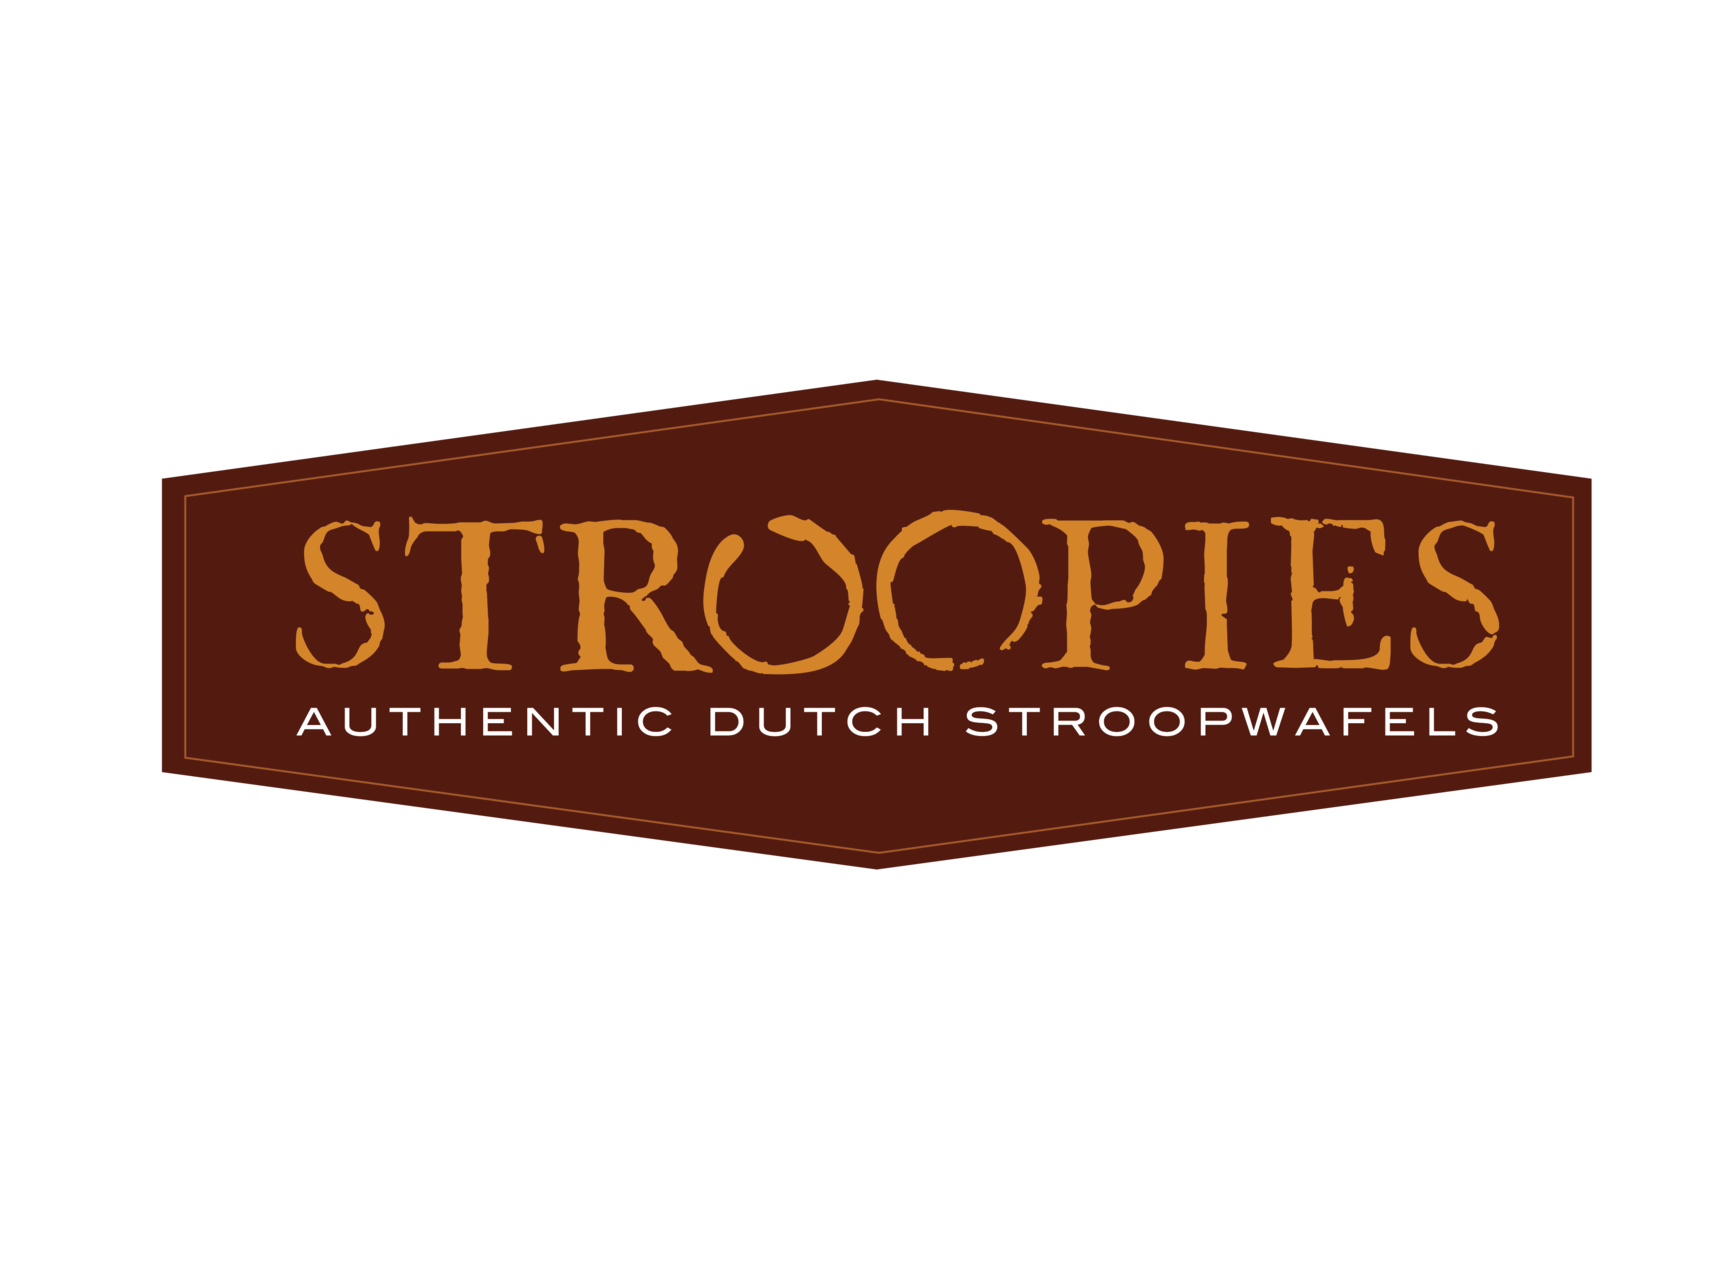 Rich, Flavorful Delight - Stroopies